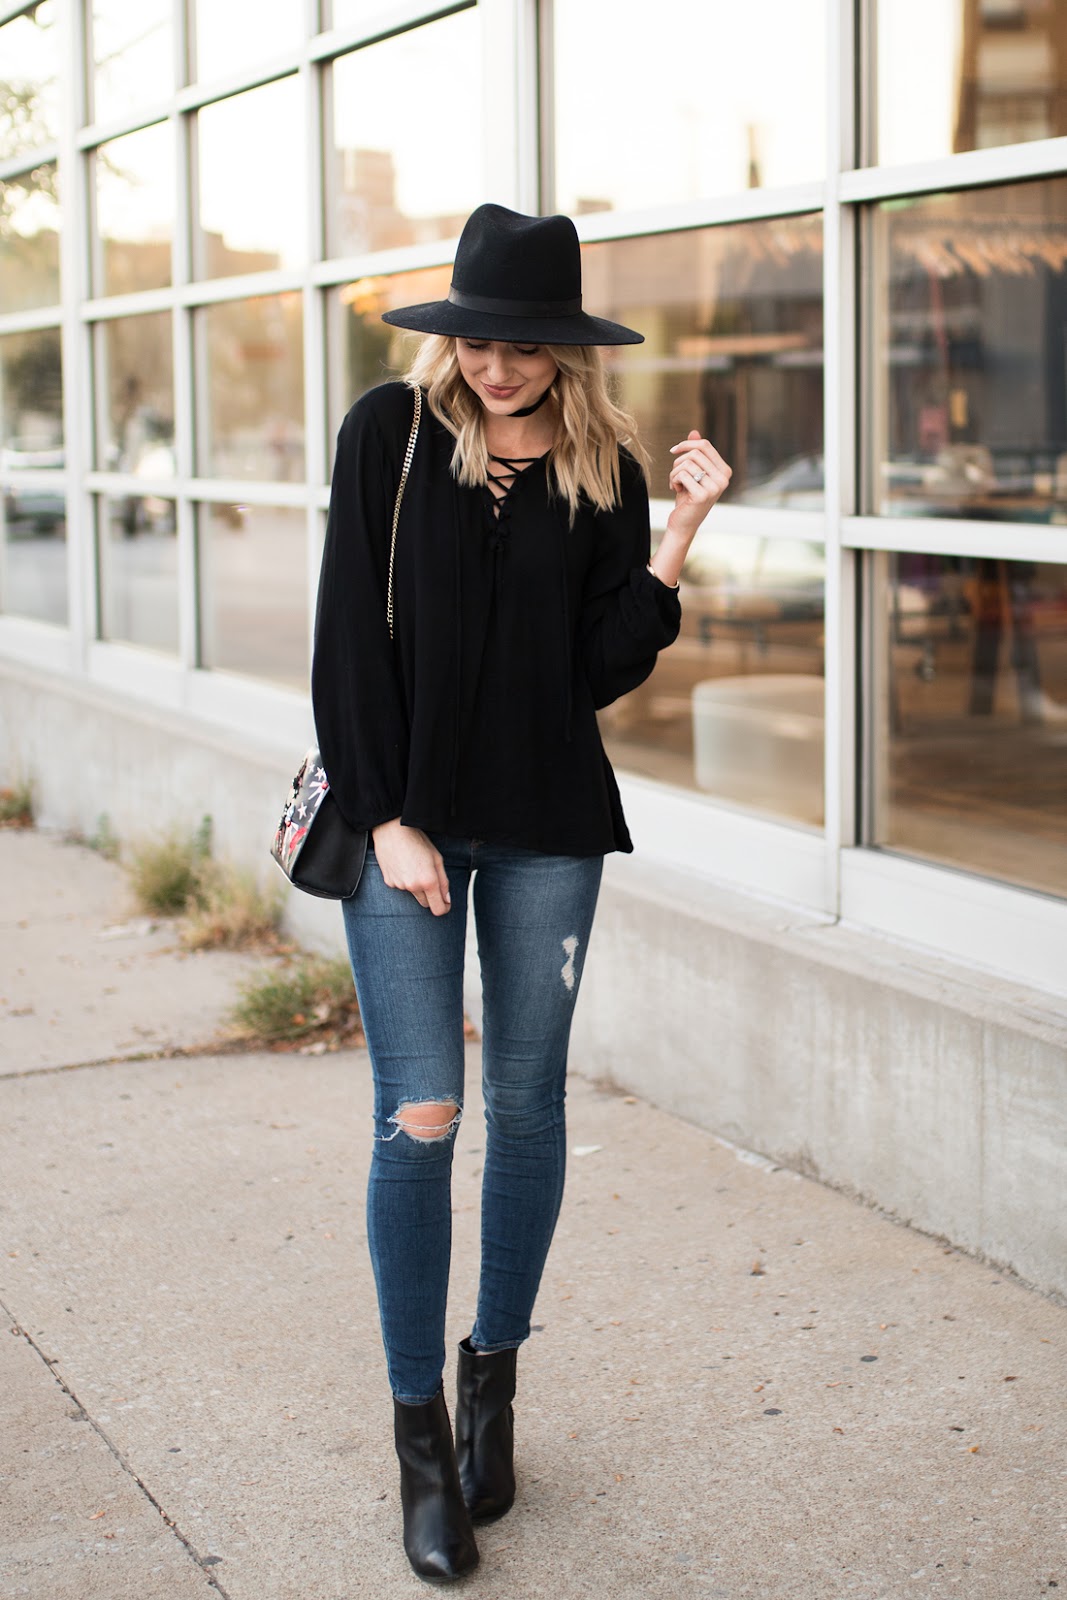 Cute fall/winter outfit